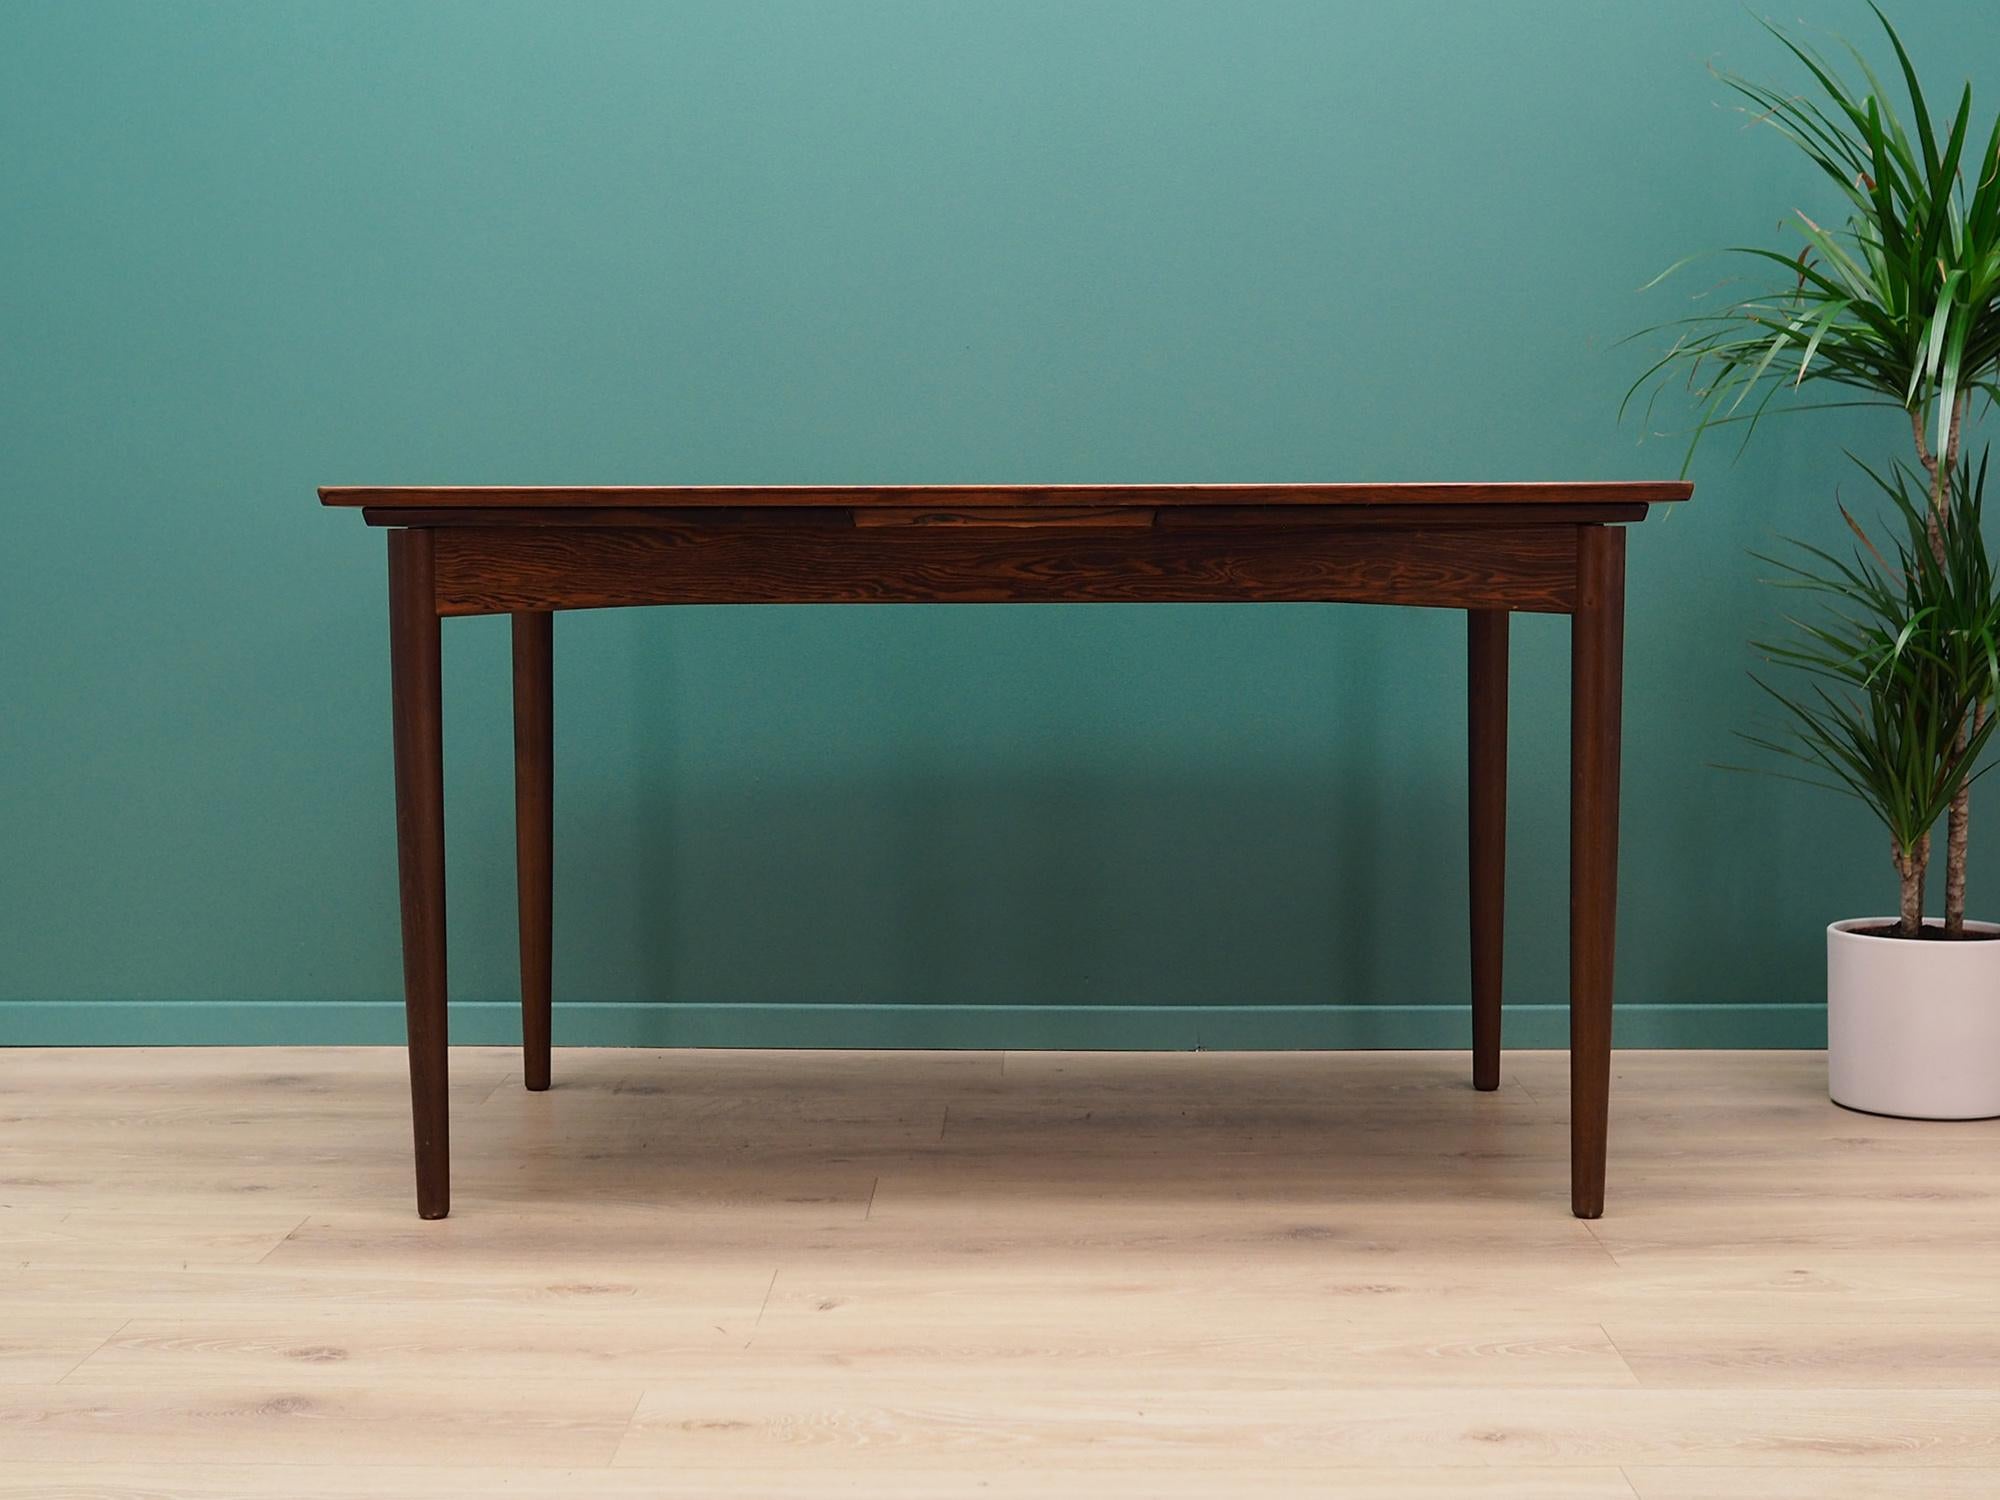 Great table from the 1960s-1970s. Scandinavian design, Minimalist form. Manufactured by the Skovby. tabletop finished with rosewood veneer. Construction made of solid rosewood. The table has two inserts pulled out from under the top. Preserved in